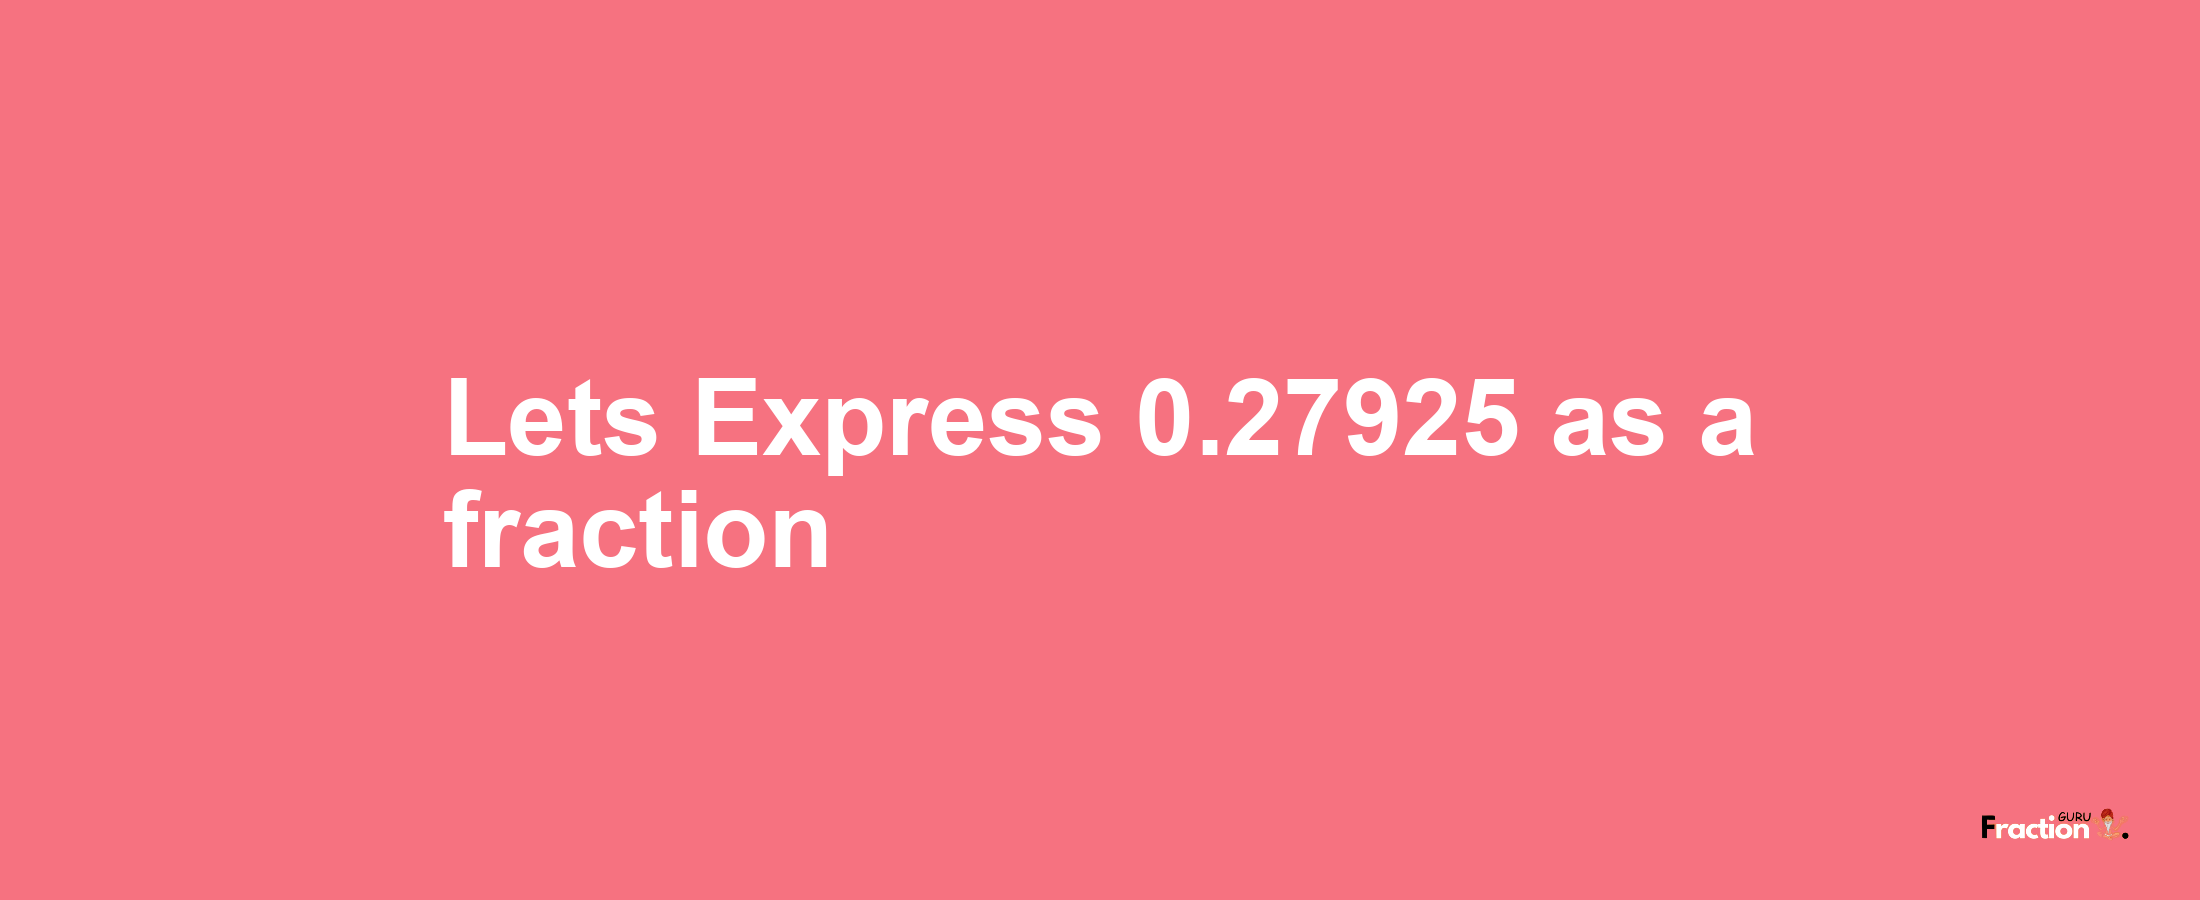 Lets Express 0.27925 as afraction